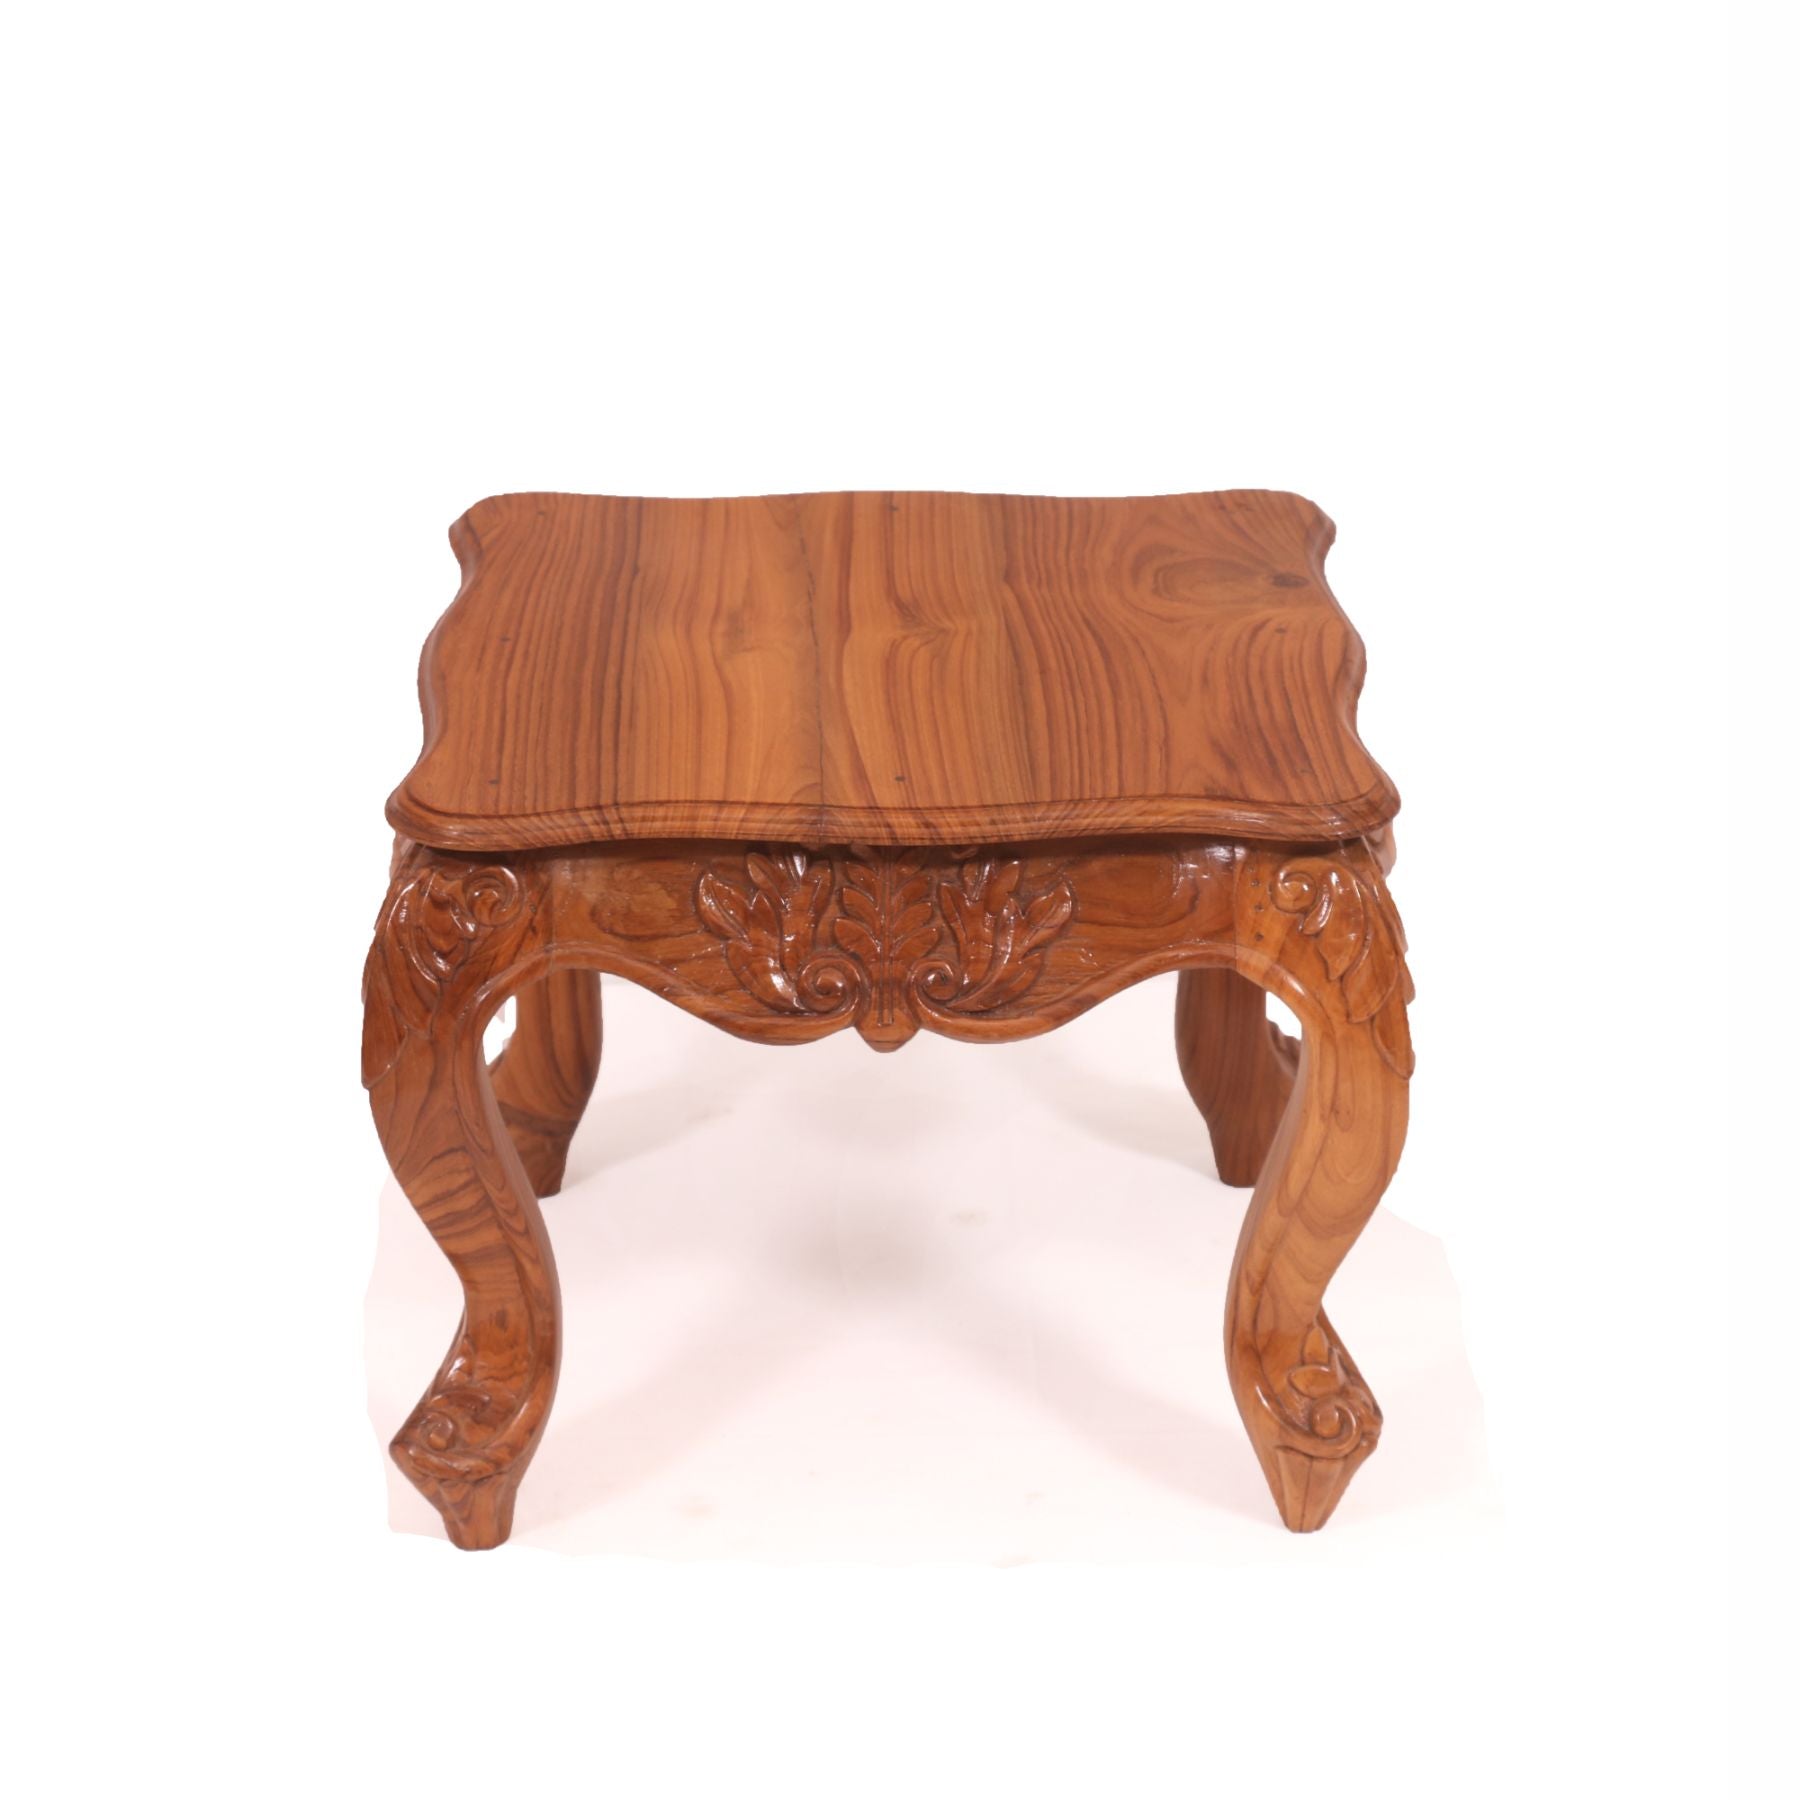 Compact Carving Teak Wood Coffee Table Large Coffee Table